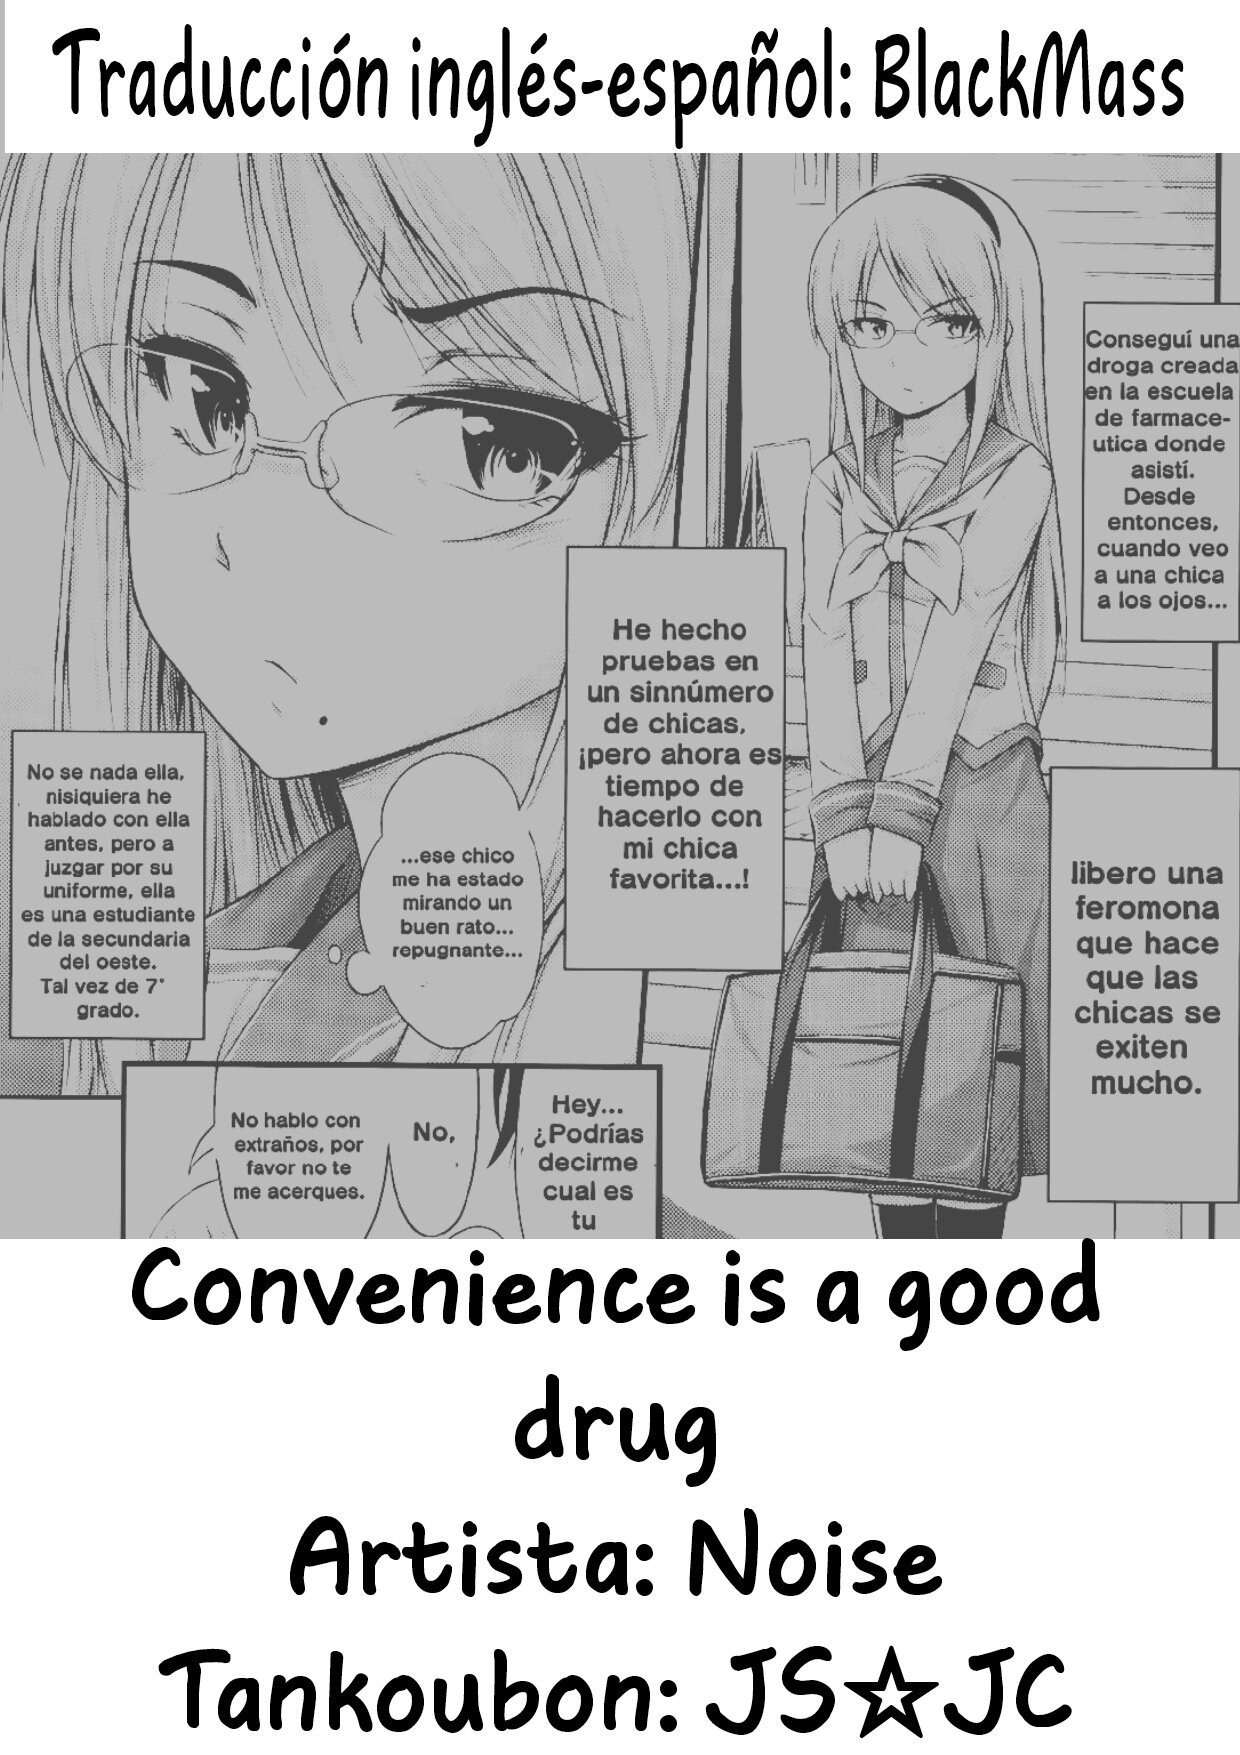 Convienience is a good drug - 16